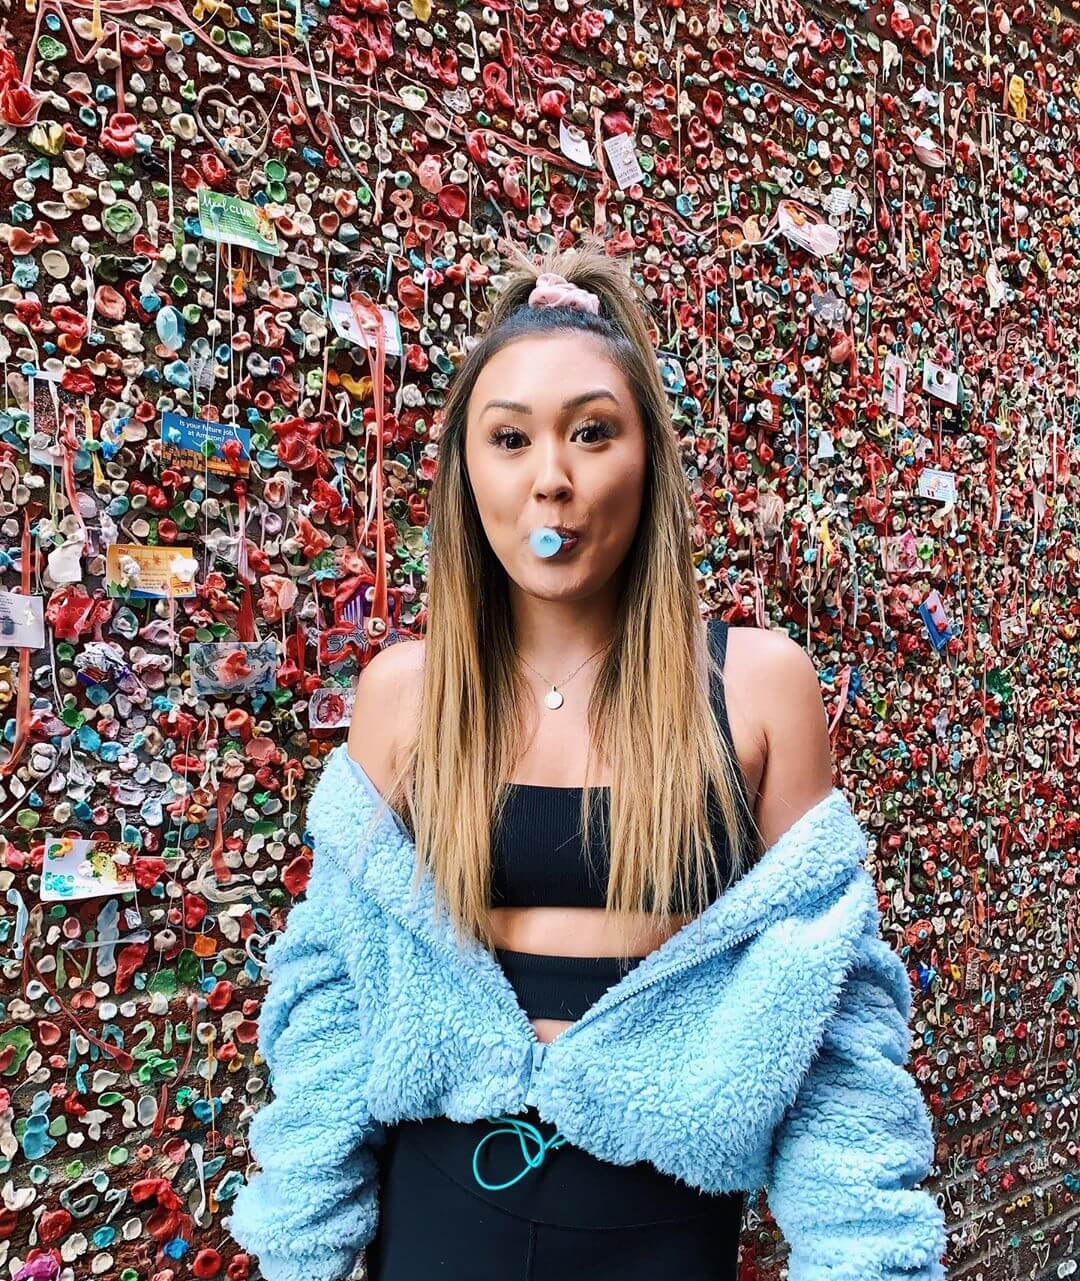 51 Hottest LaurDIY Big Butt Pictures Which Will Make You Swelter All Over | Best Of Comic Books